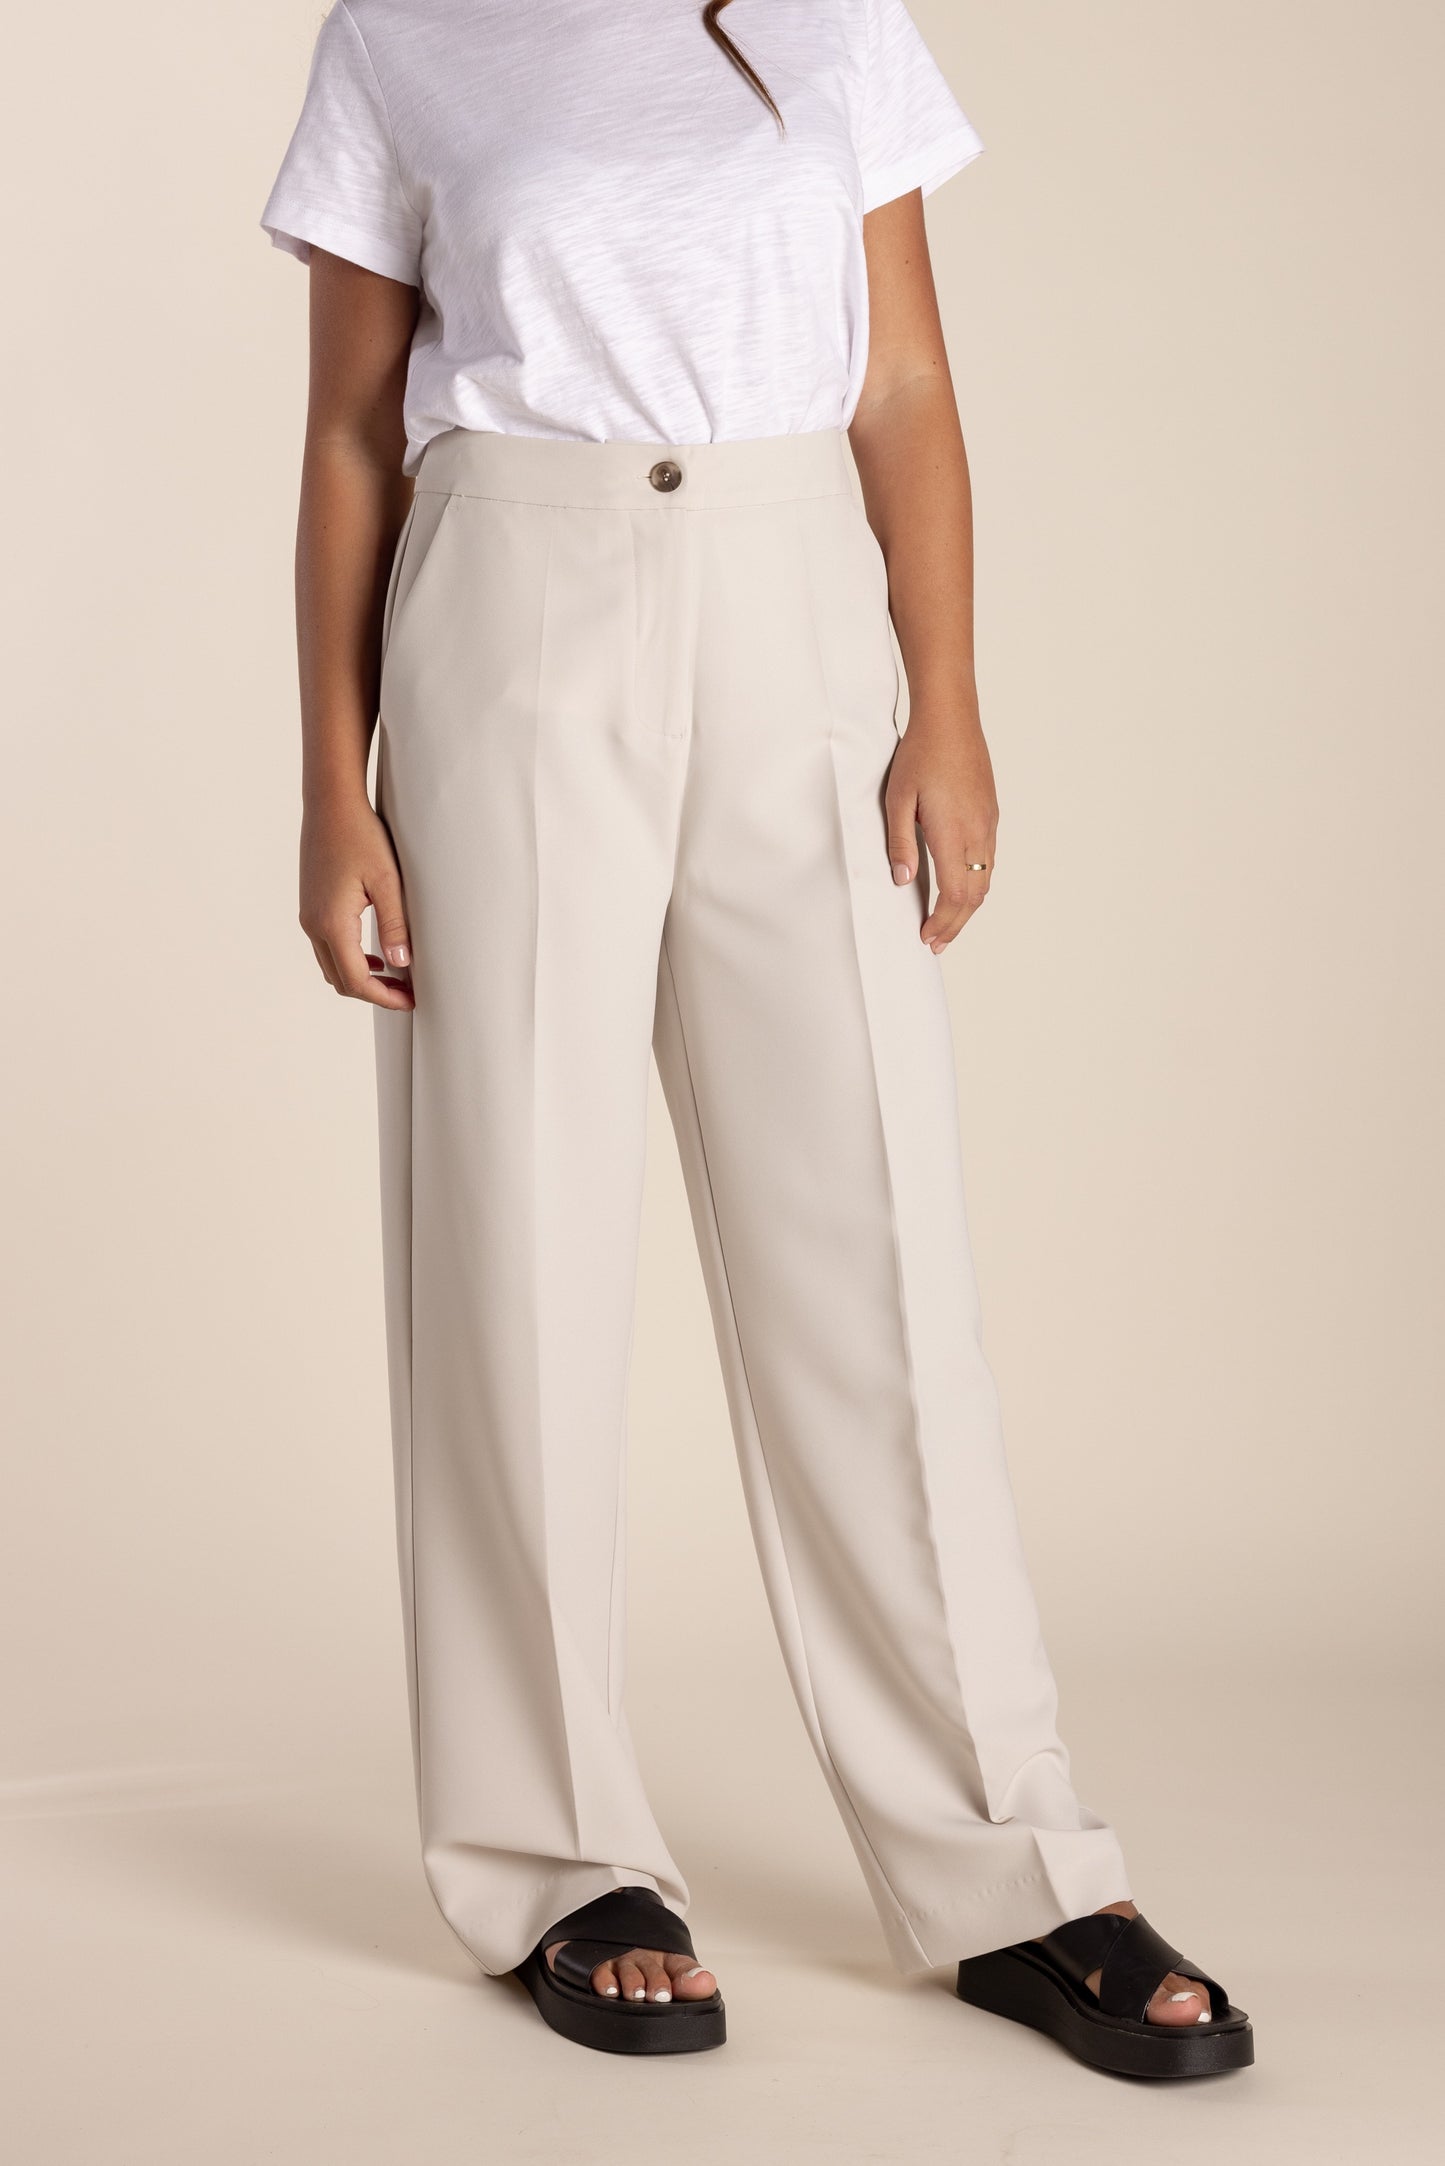 Two T's Wide Leg Pant